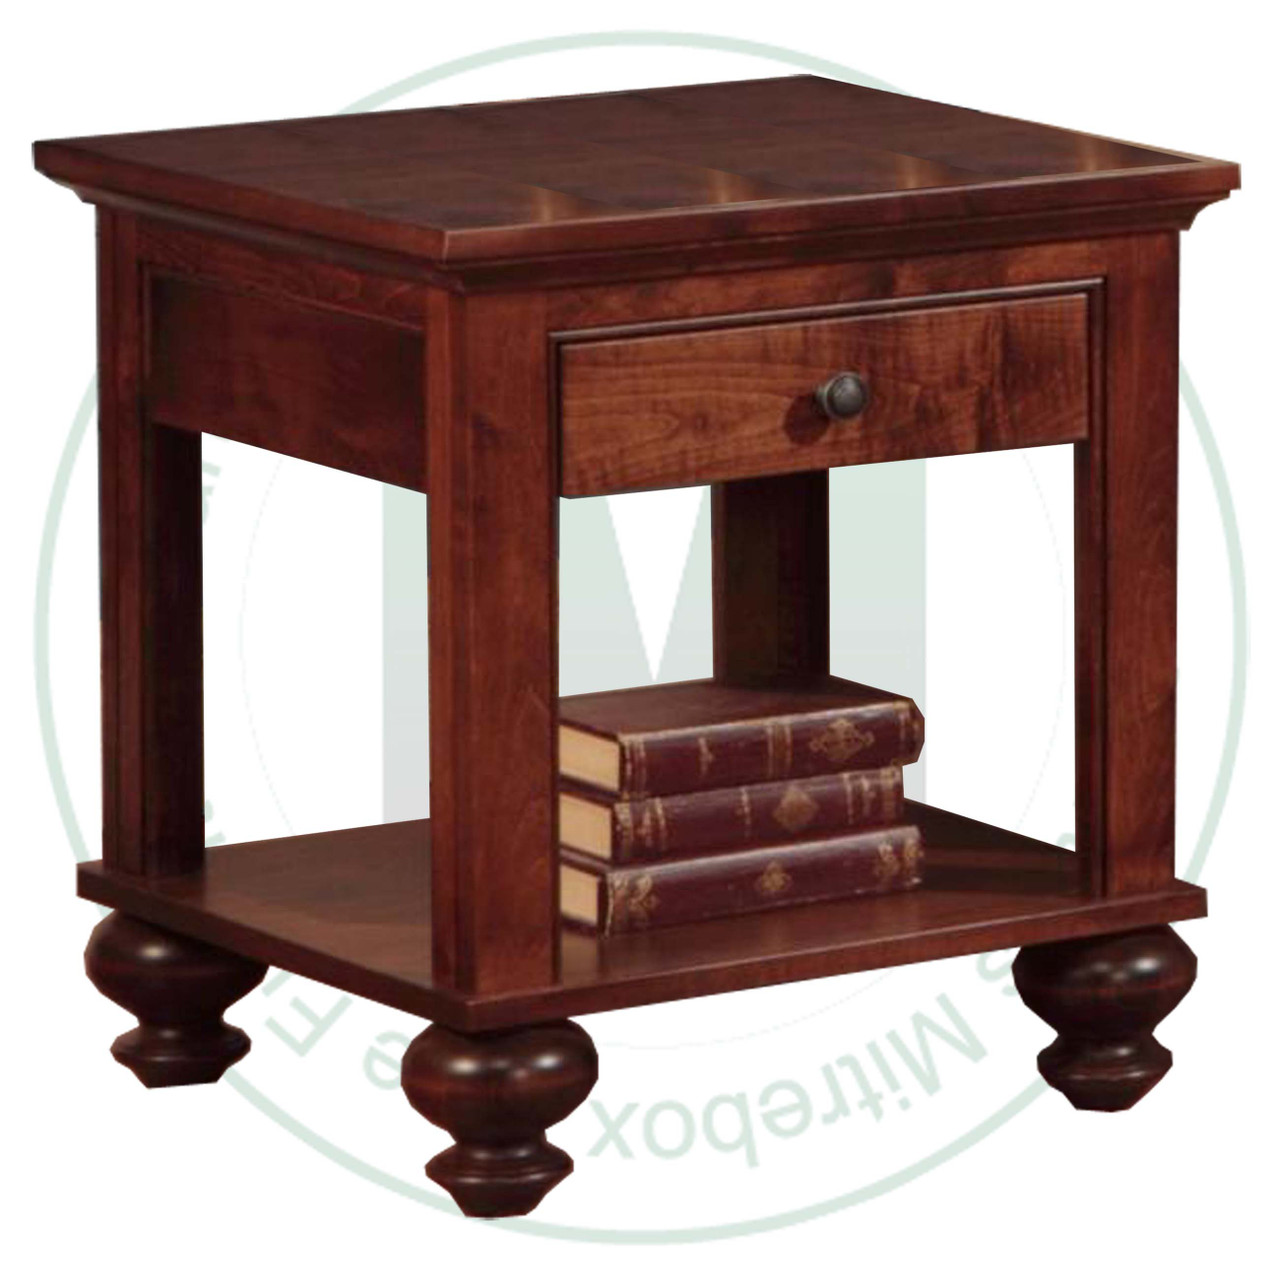 Oak Georgetown End Table 23'' Deep x 23'' Wide x 26'' High With 1 Drawer